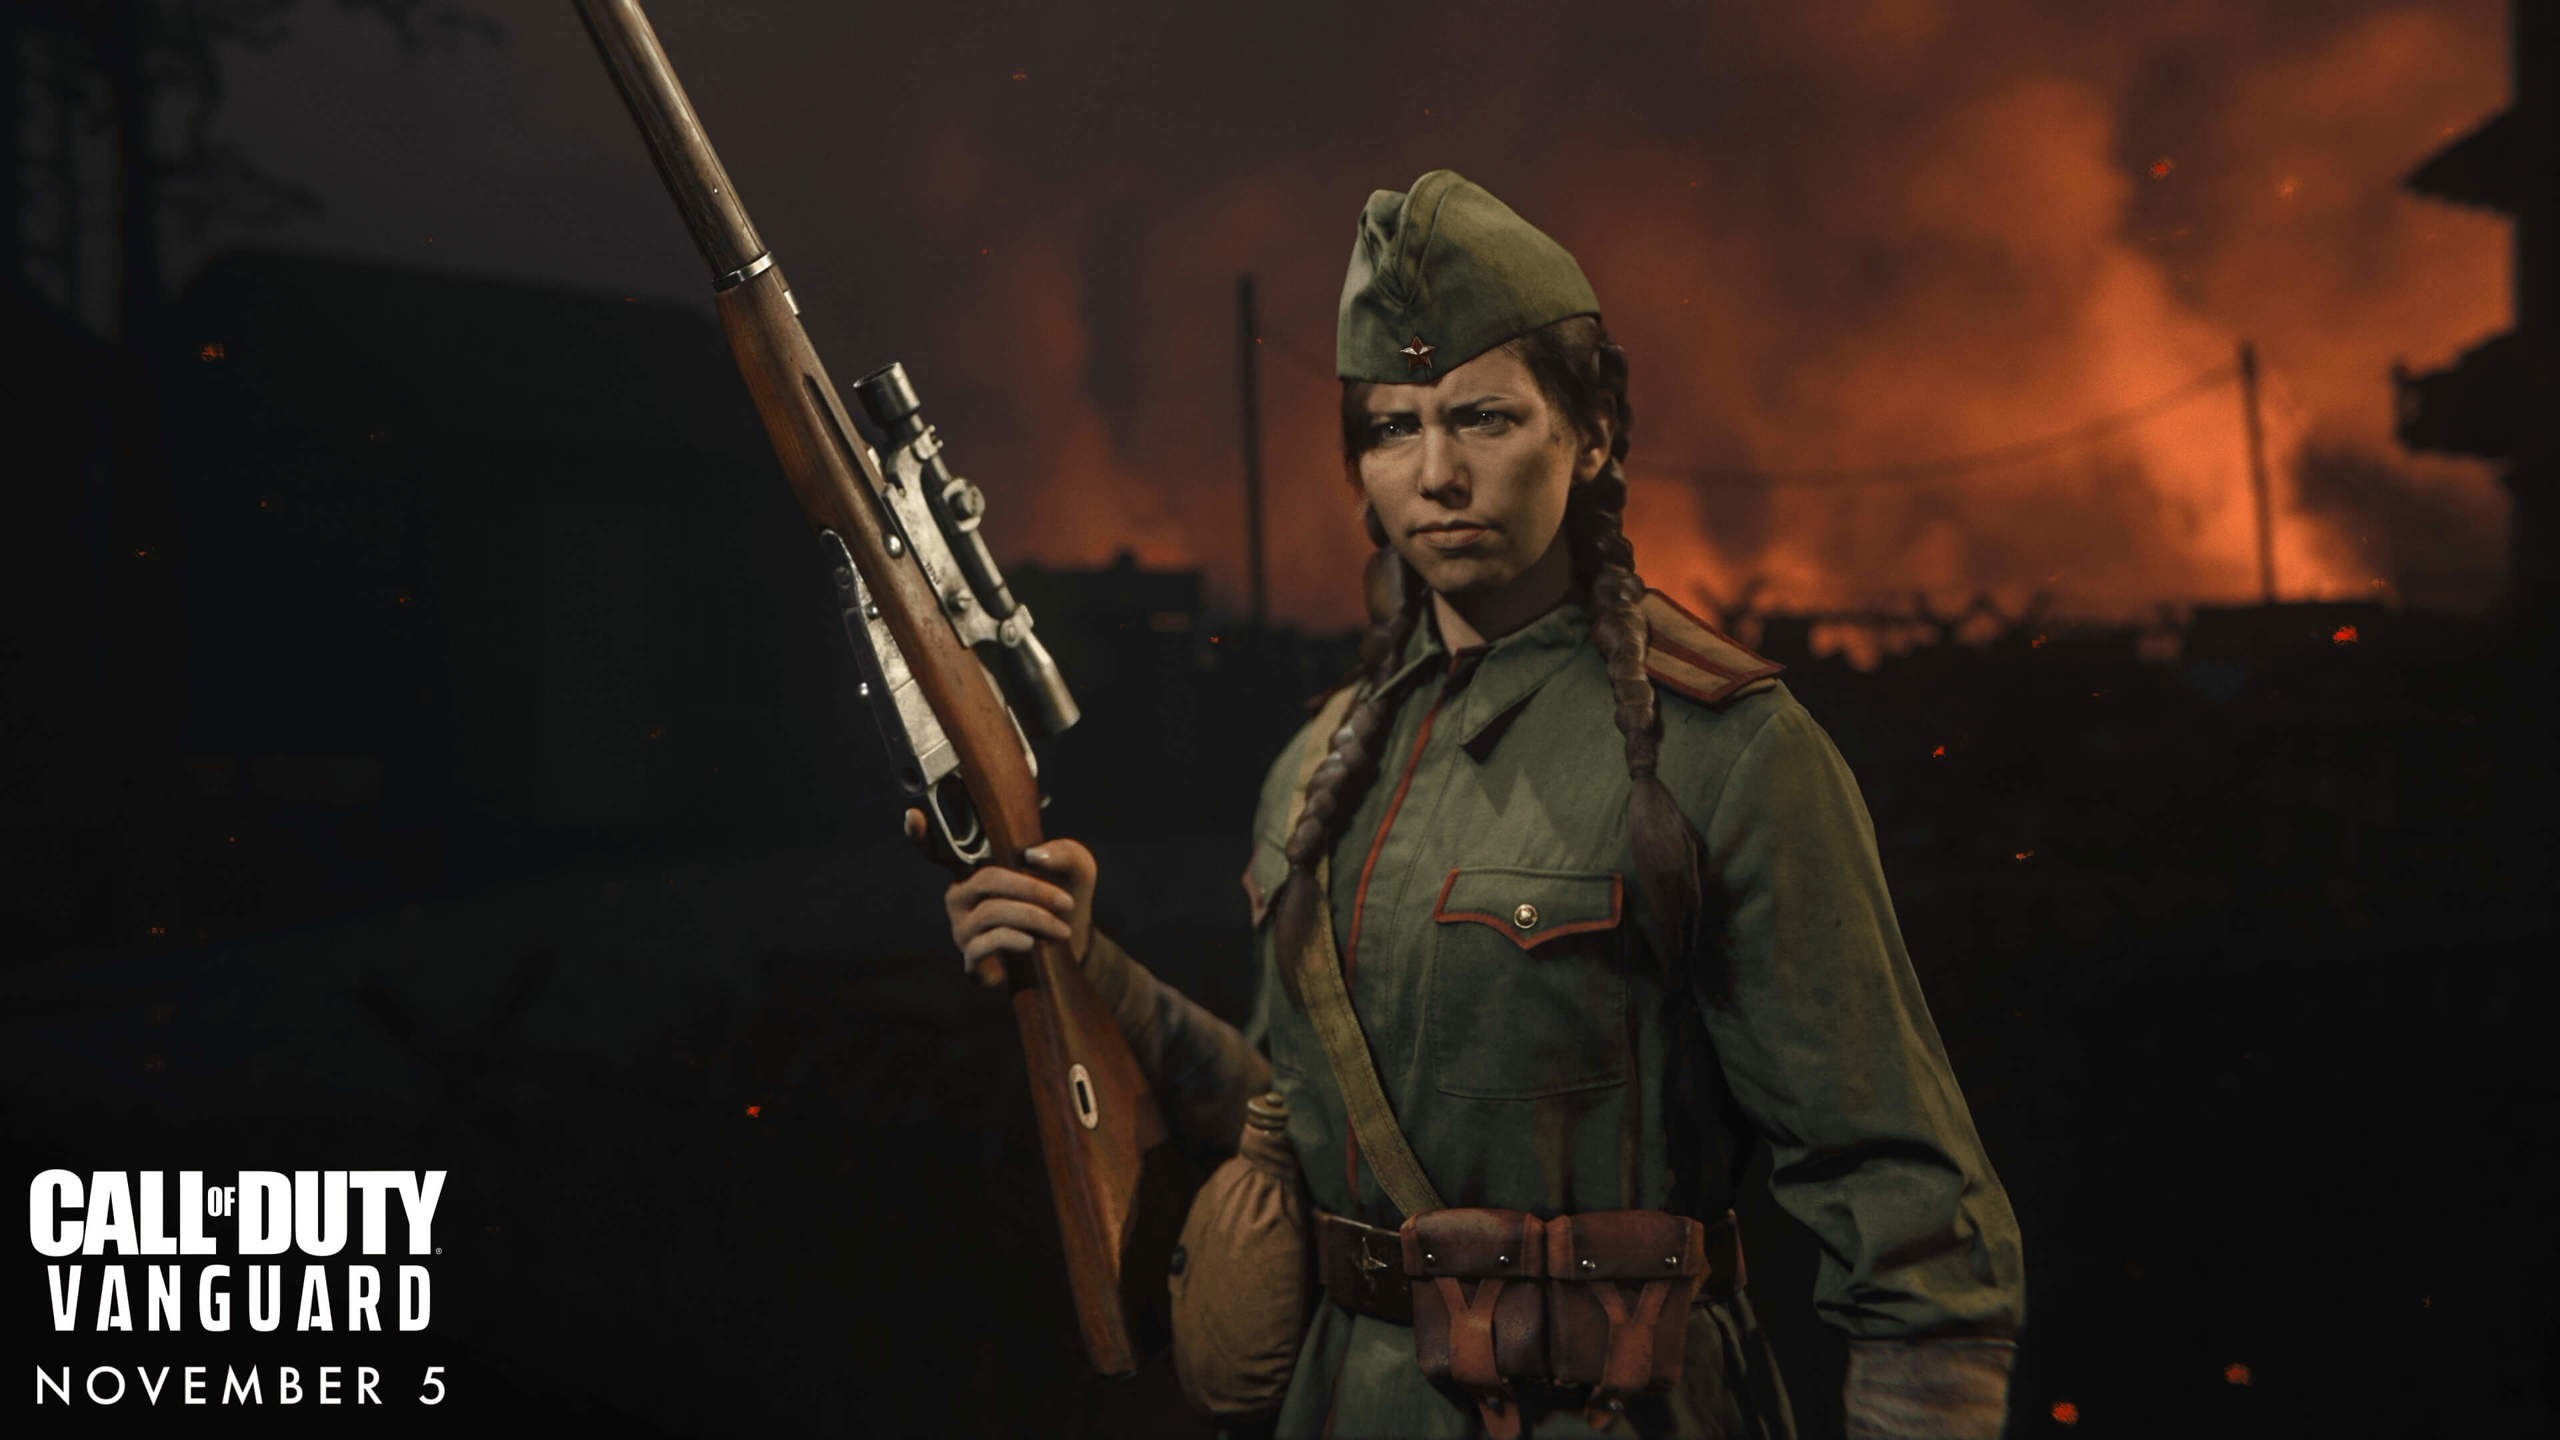 Character from Call of Duty: Vanguard in an army uniform, holding a rifle.